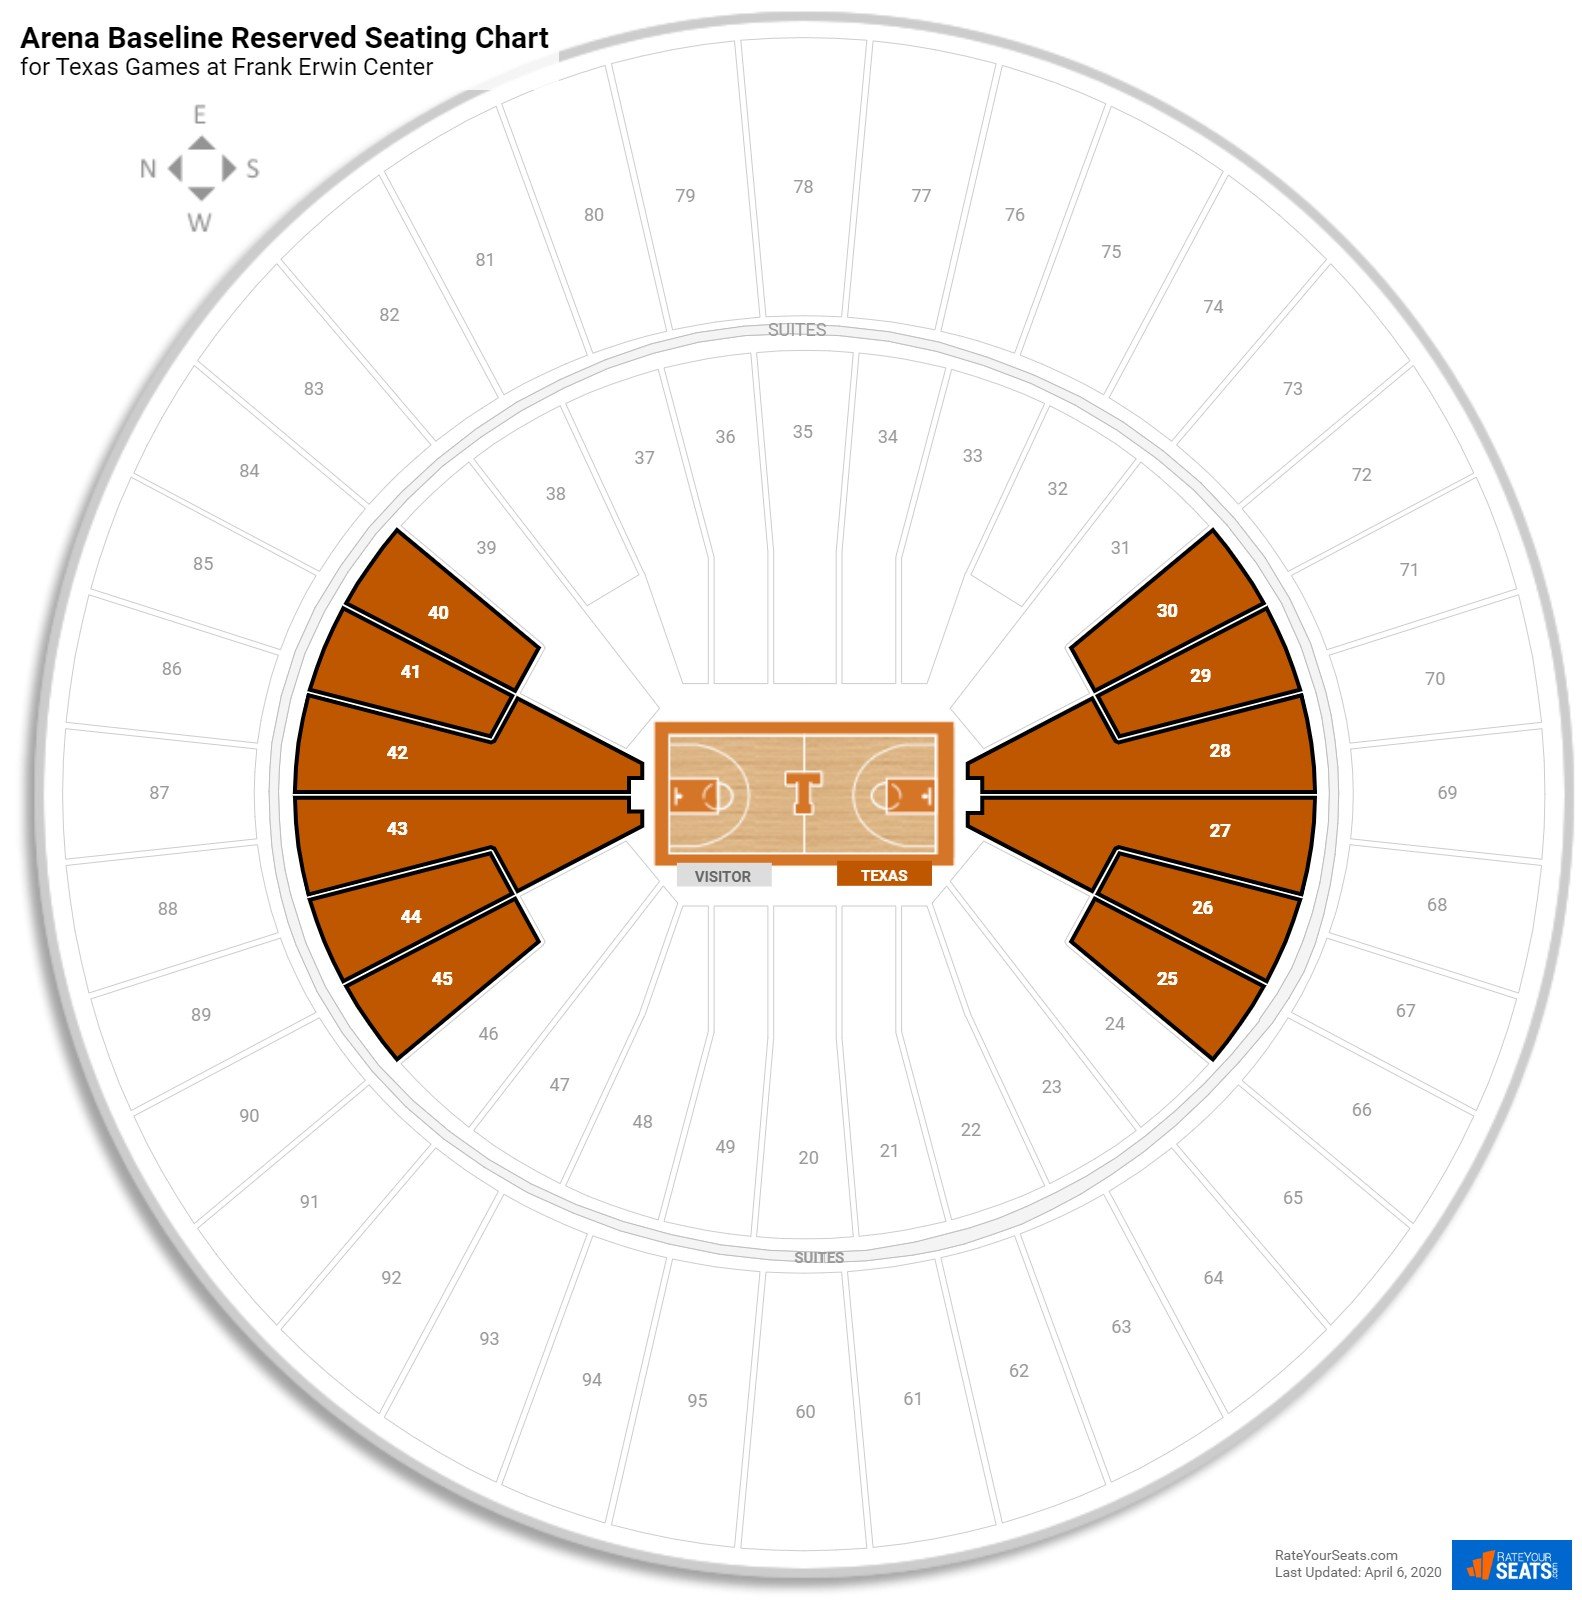 Frank Erwin Center (Texas) Seating Guide - RateYourSeats.com